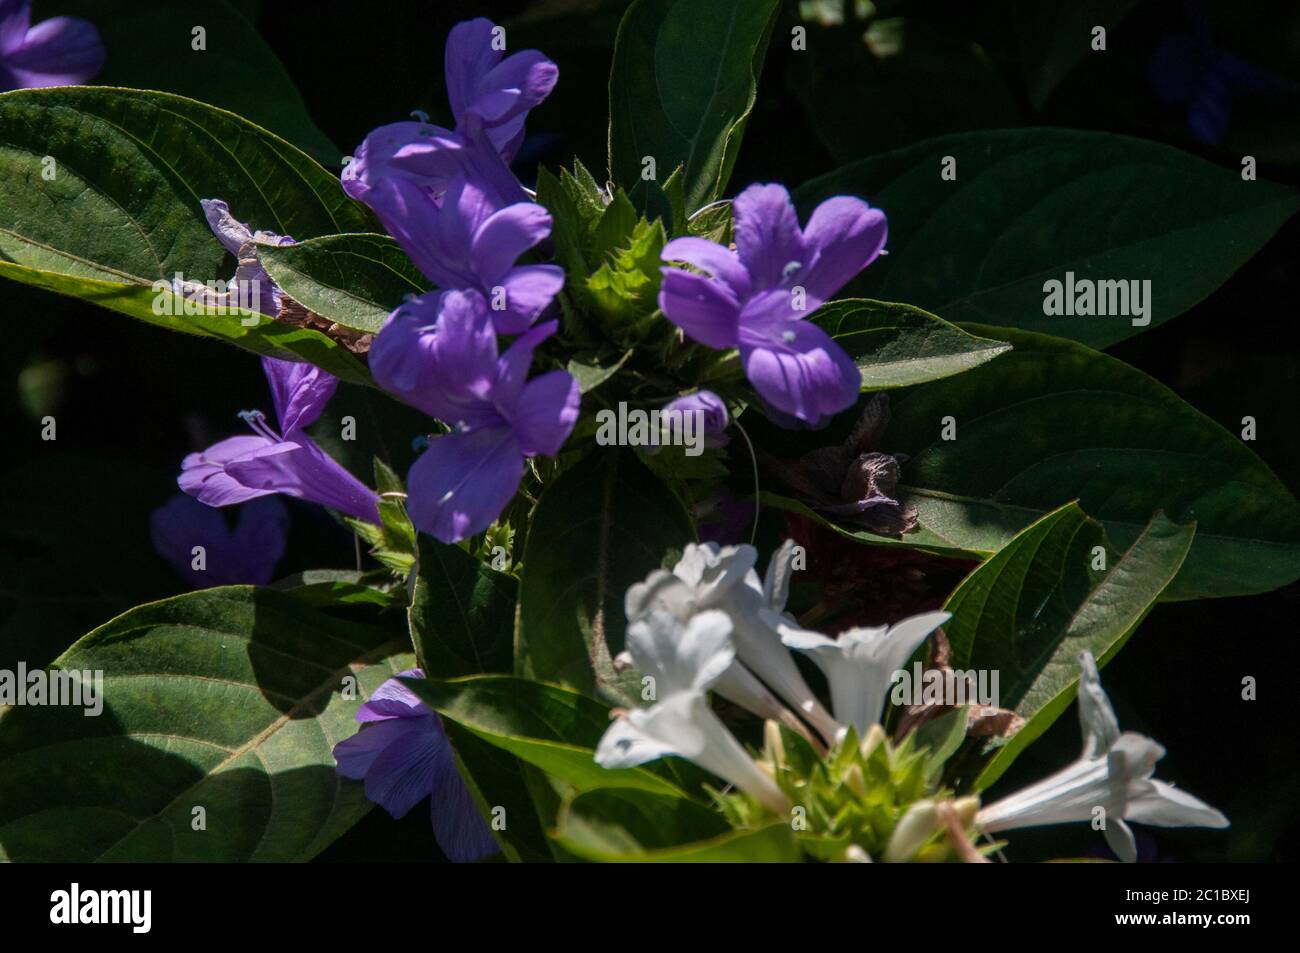 Barleria cristata, the Philippine violet, bluebell barleria or crested Philippine violet, is a plant species in the family Acanthaceae. Stock Photo